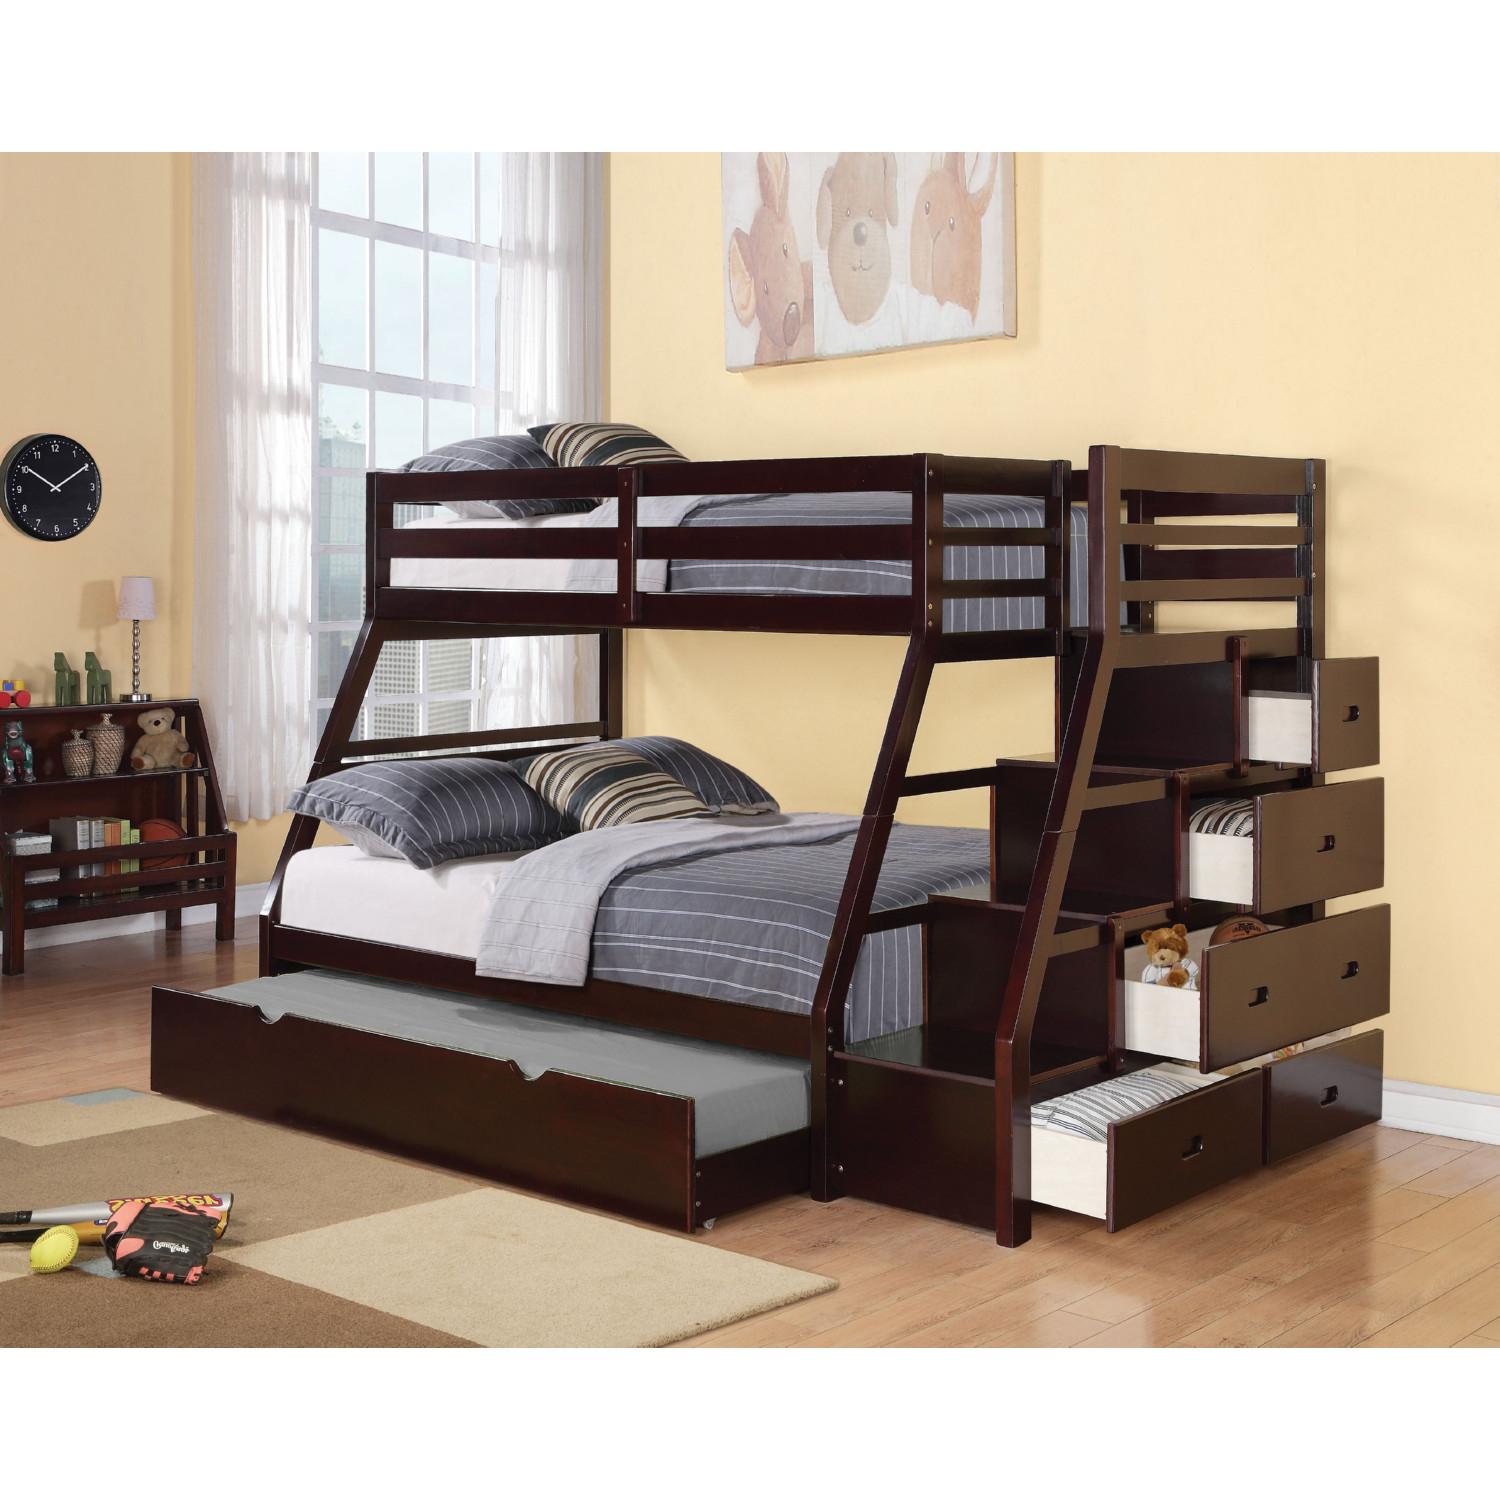 

    
Transitional Espresso Twin/Full Bunk Bed by Acme Jason 37015
